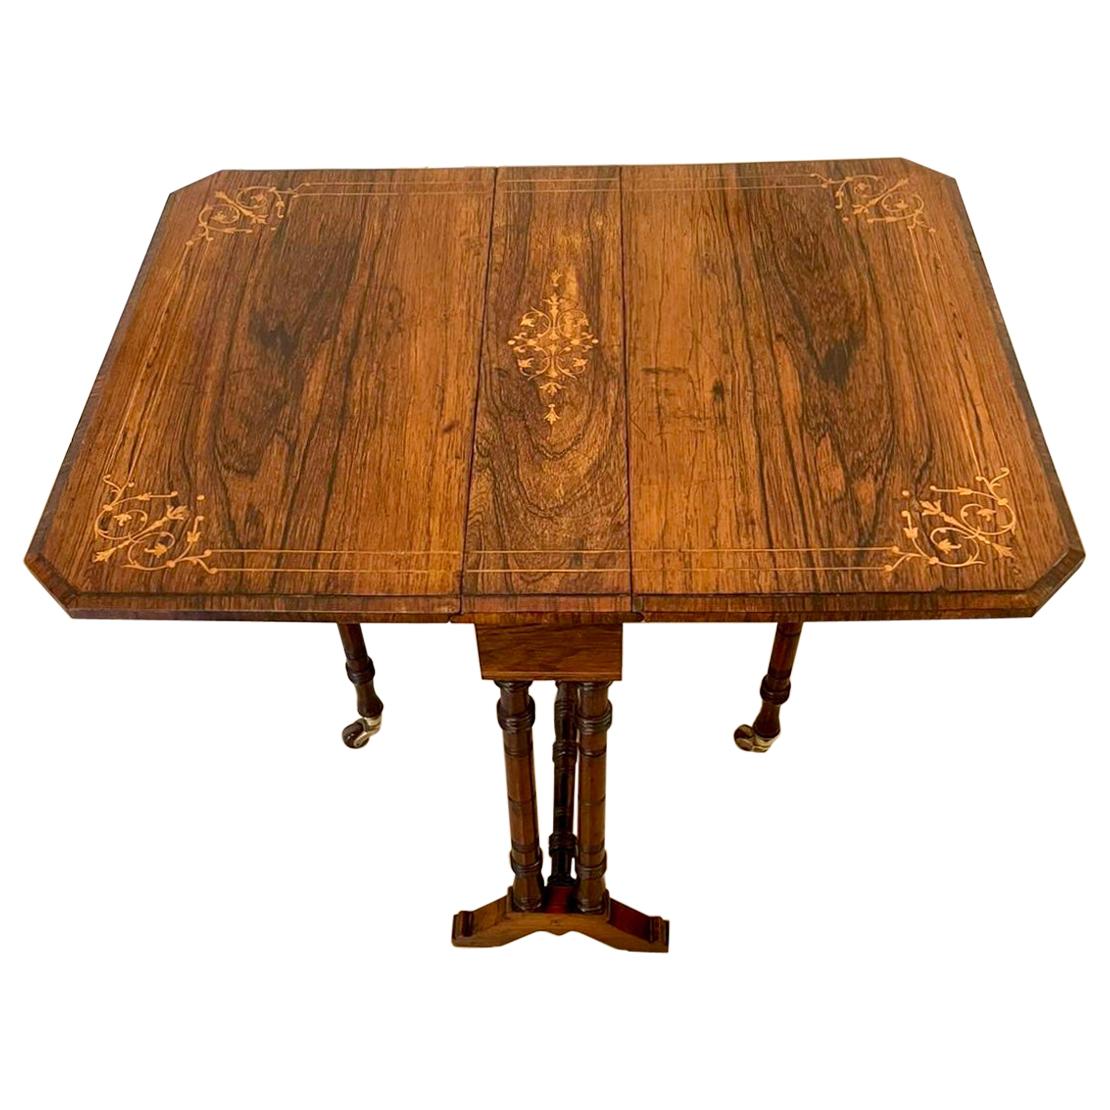 Quality Antique Edwardian Inlaid Rosewood Sutherland Table For Sale